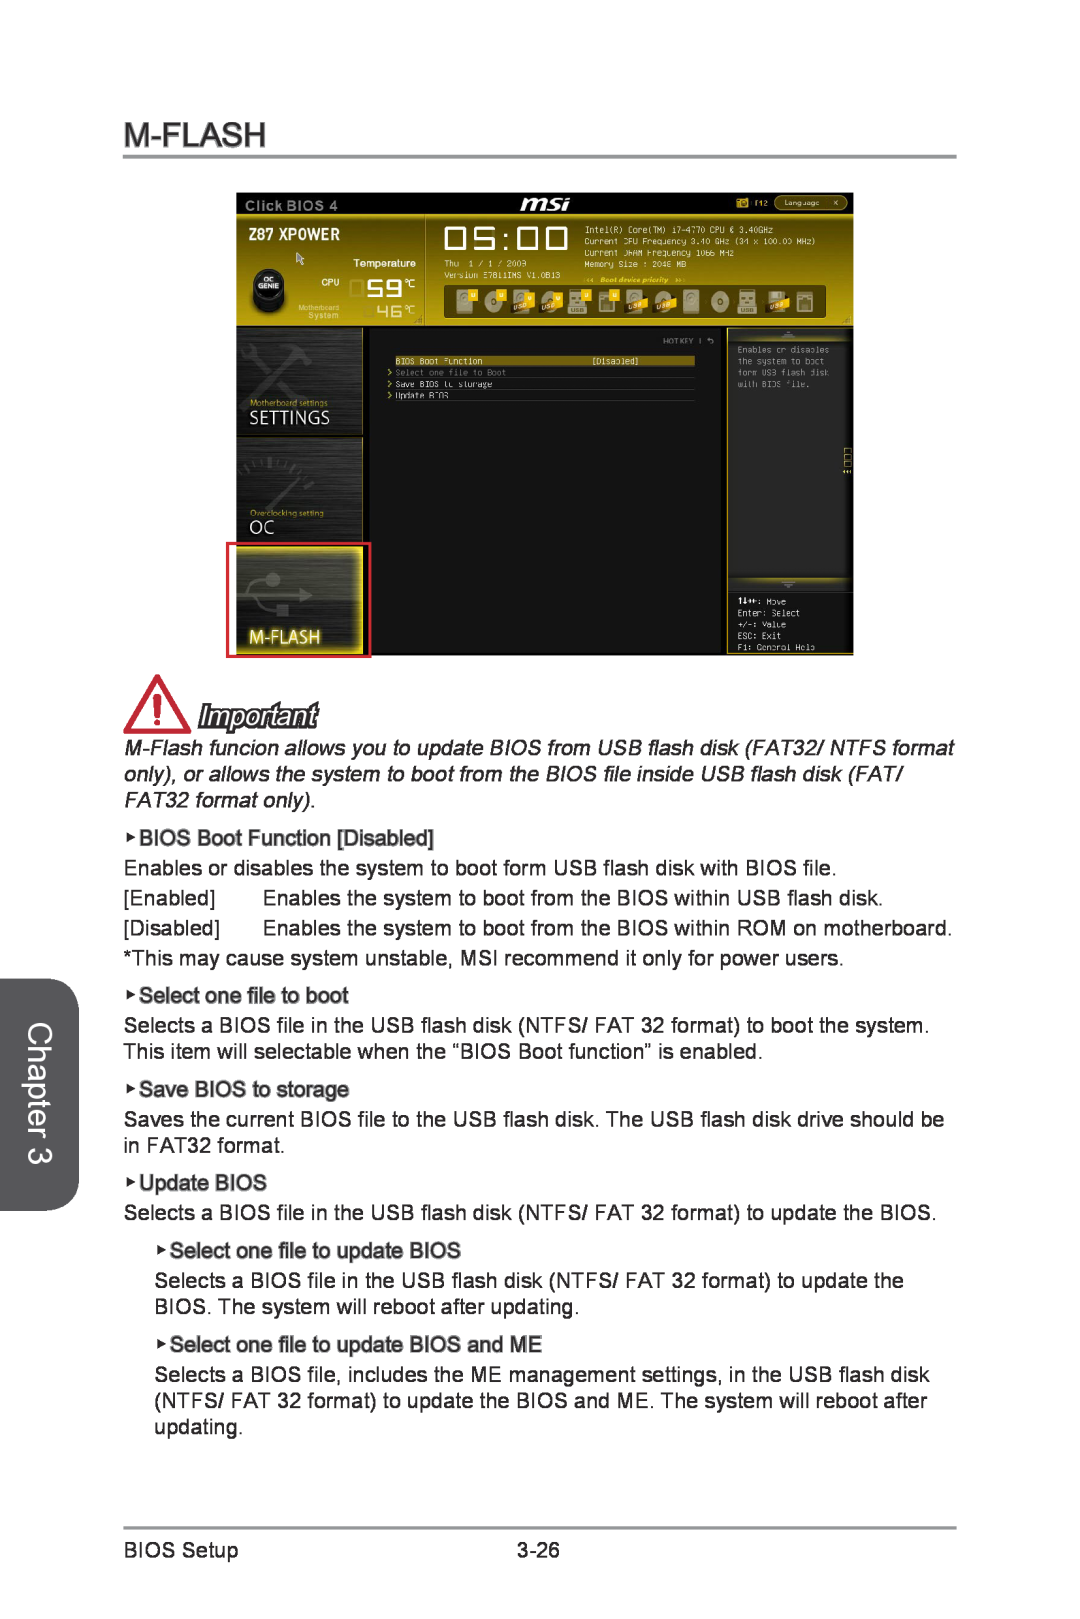 MSI Z87-XPOWER manual M-Flash, Chapter, Enables the system to boot from the BIOS within ROM on motherboard 